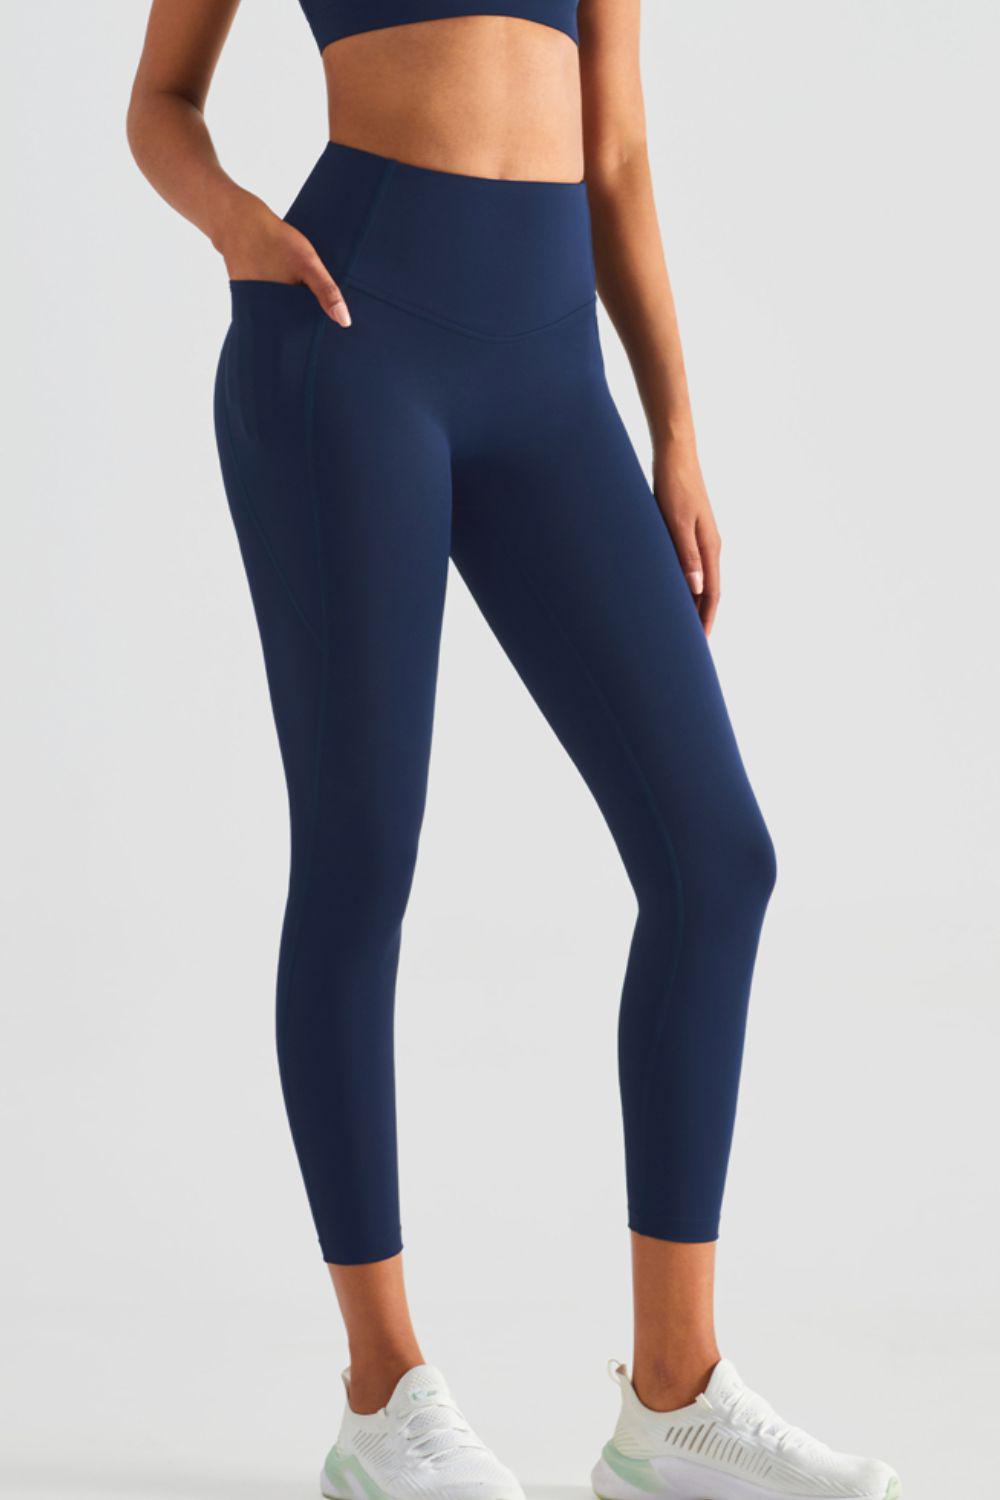 Wide Waistband Sports Leggings with Pockets-BOTTOM SIZES SMALL MEDIUM LARGE-[Adult]-[Female]-Dark Navy-4-2022 Online Blue Zone Planet